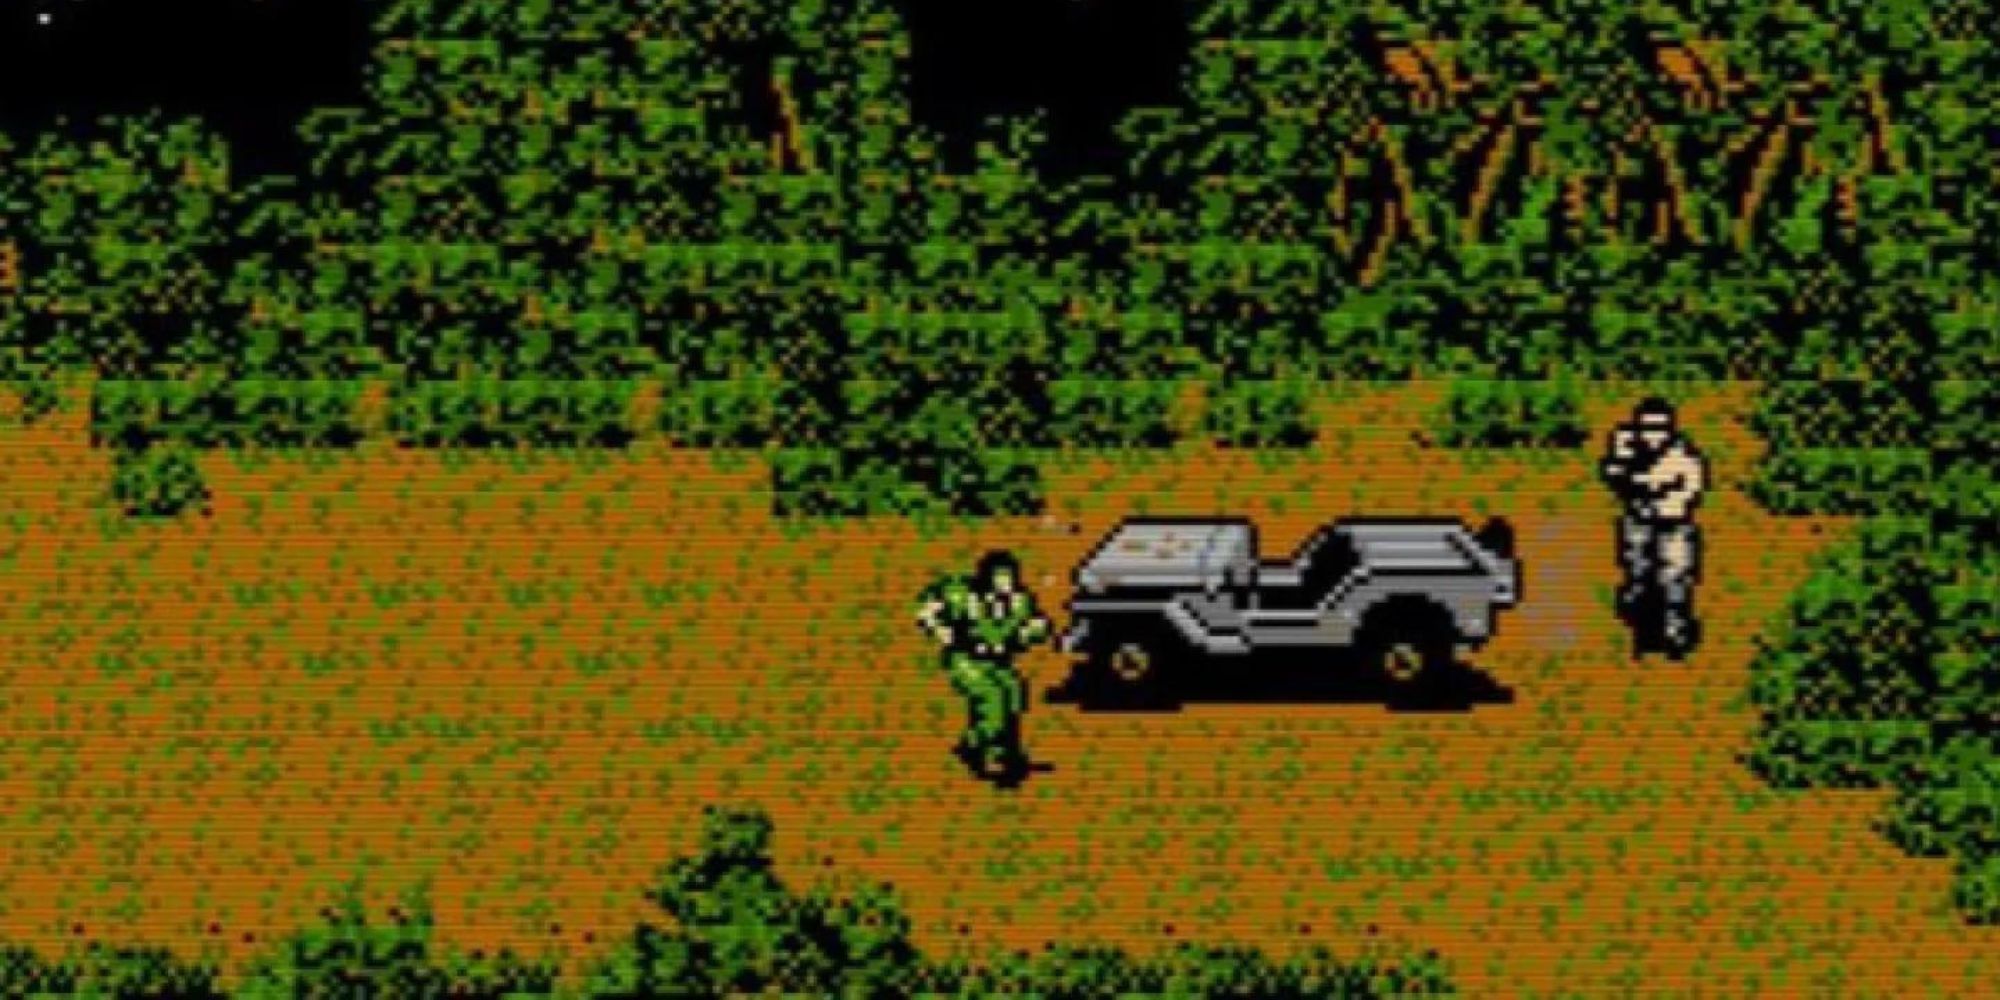 Solid Snake sneaks up on an enemy in the jungle